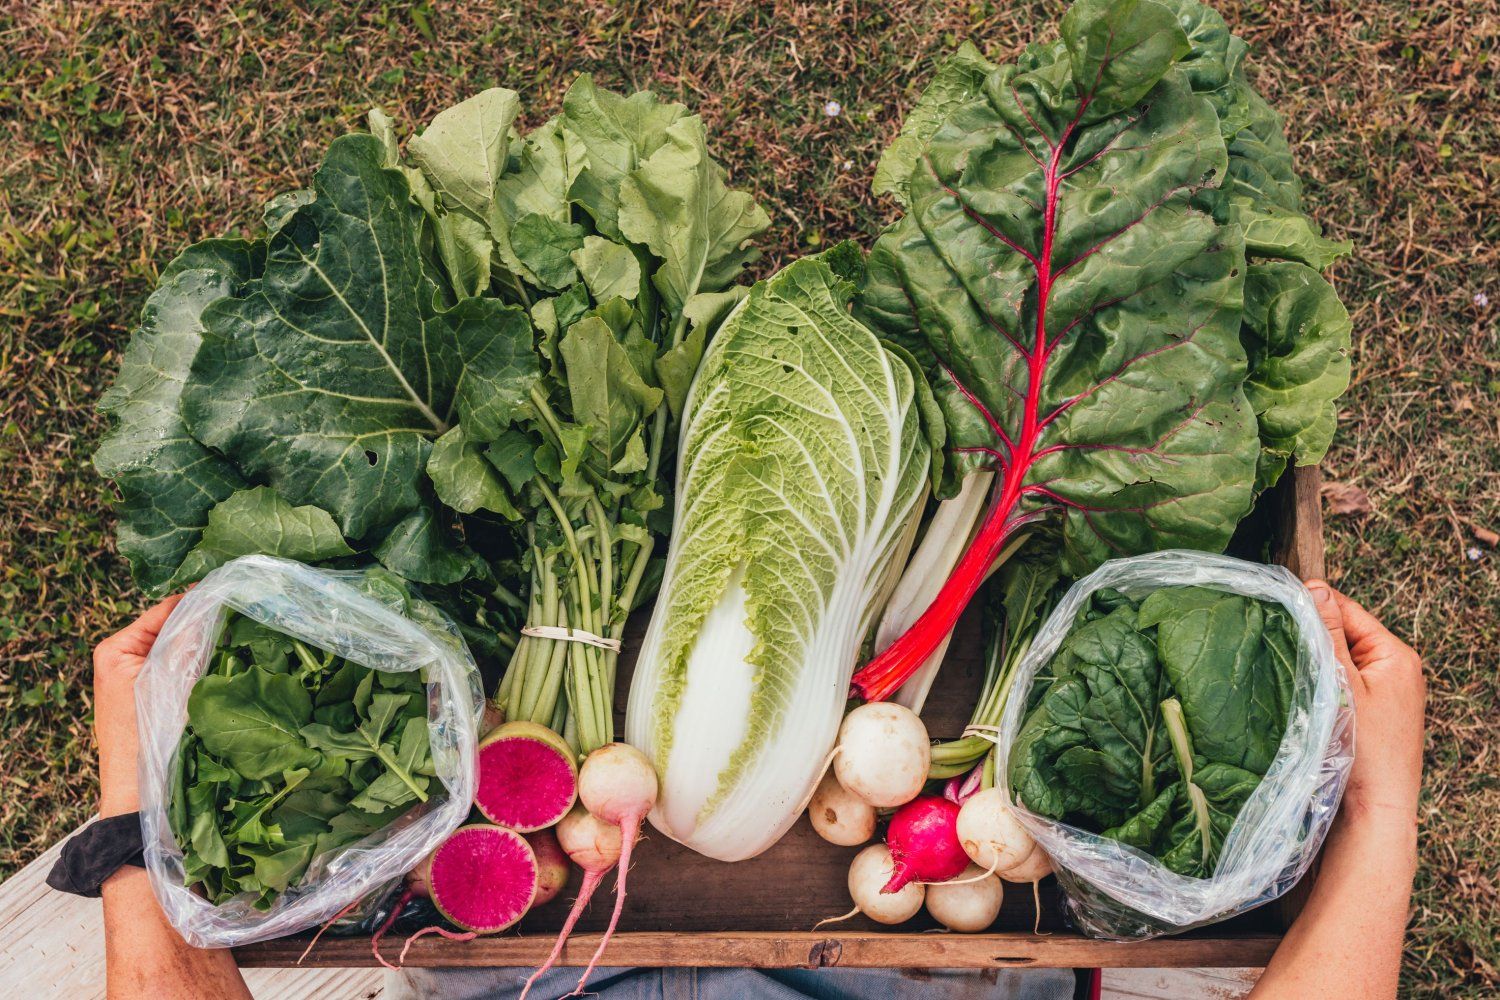 Next Happening: Eat More Veggies in 2024! The Village Farm Vegetable Share Makes it Easy